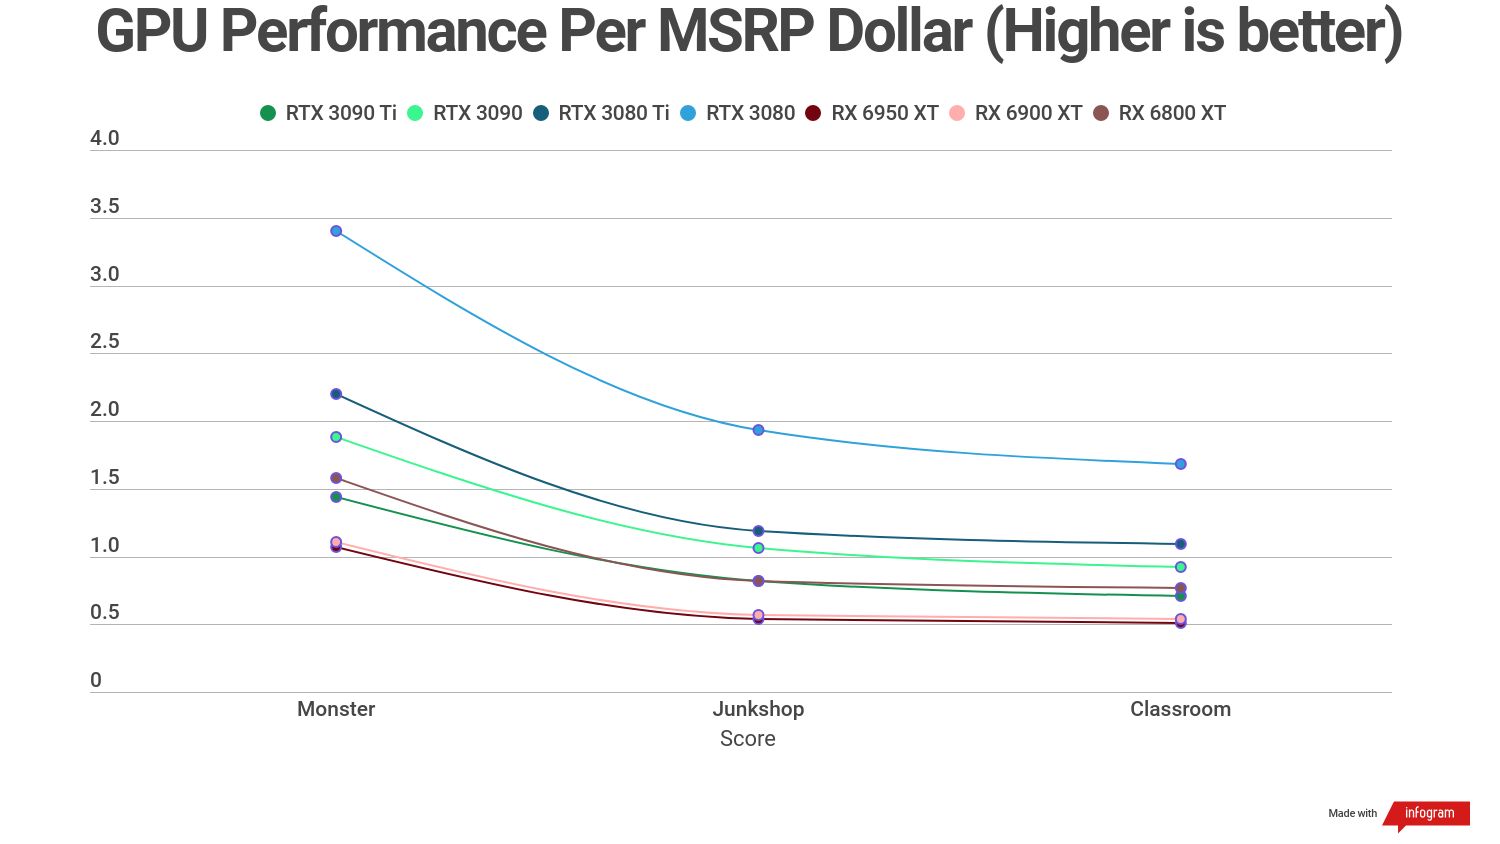 A chart showing the relative performance per MSRP dollar for Nvidia and AMD graphics cards